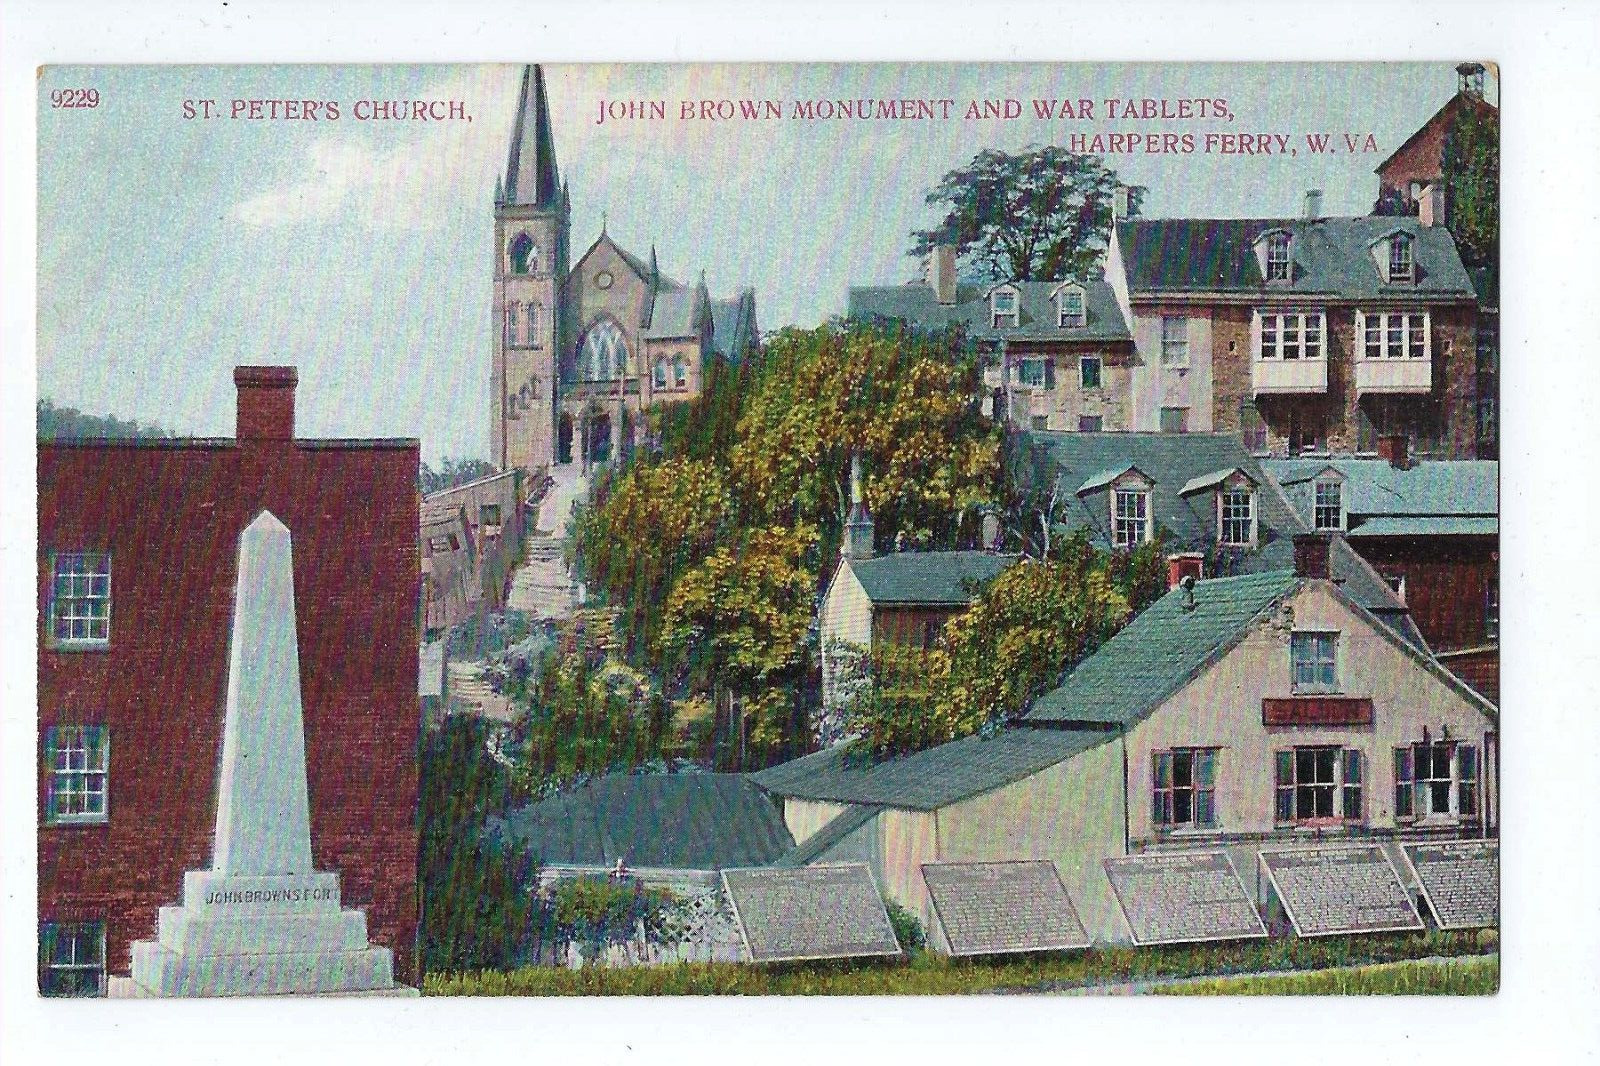 St. Peters Church Postcard John Brown Monument Harpers Ferry West Virginia c1908